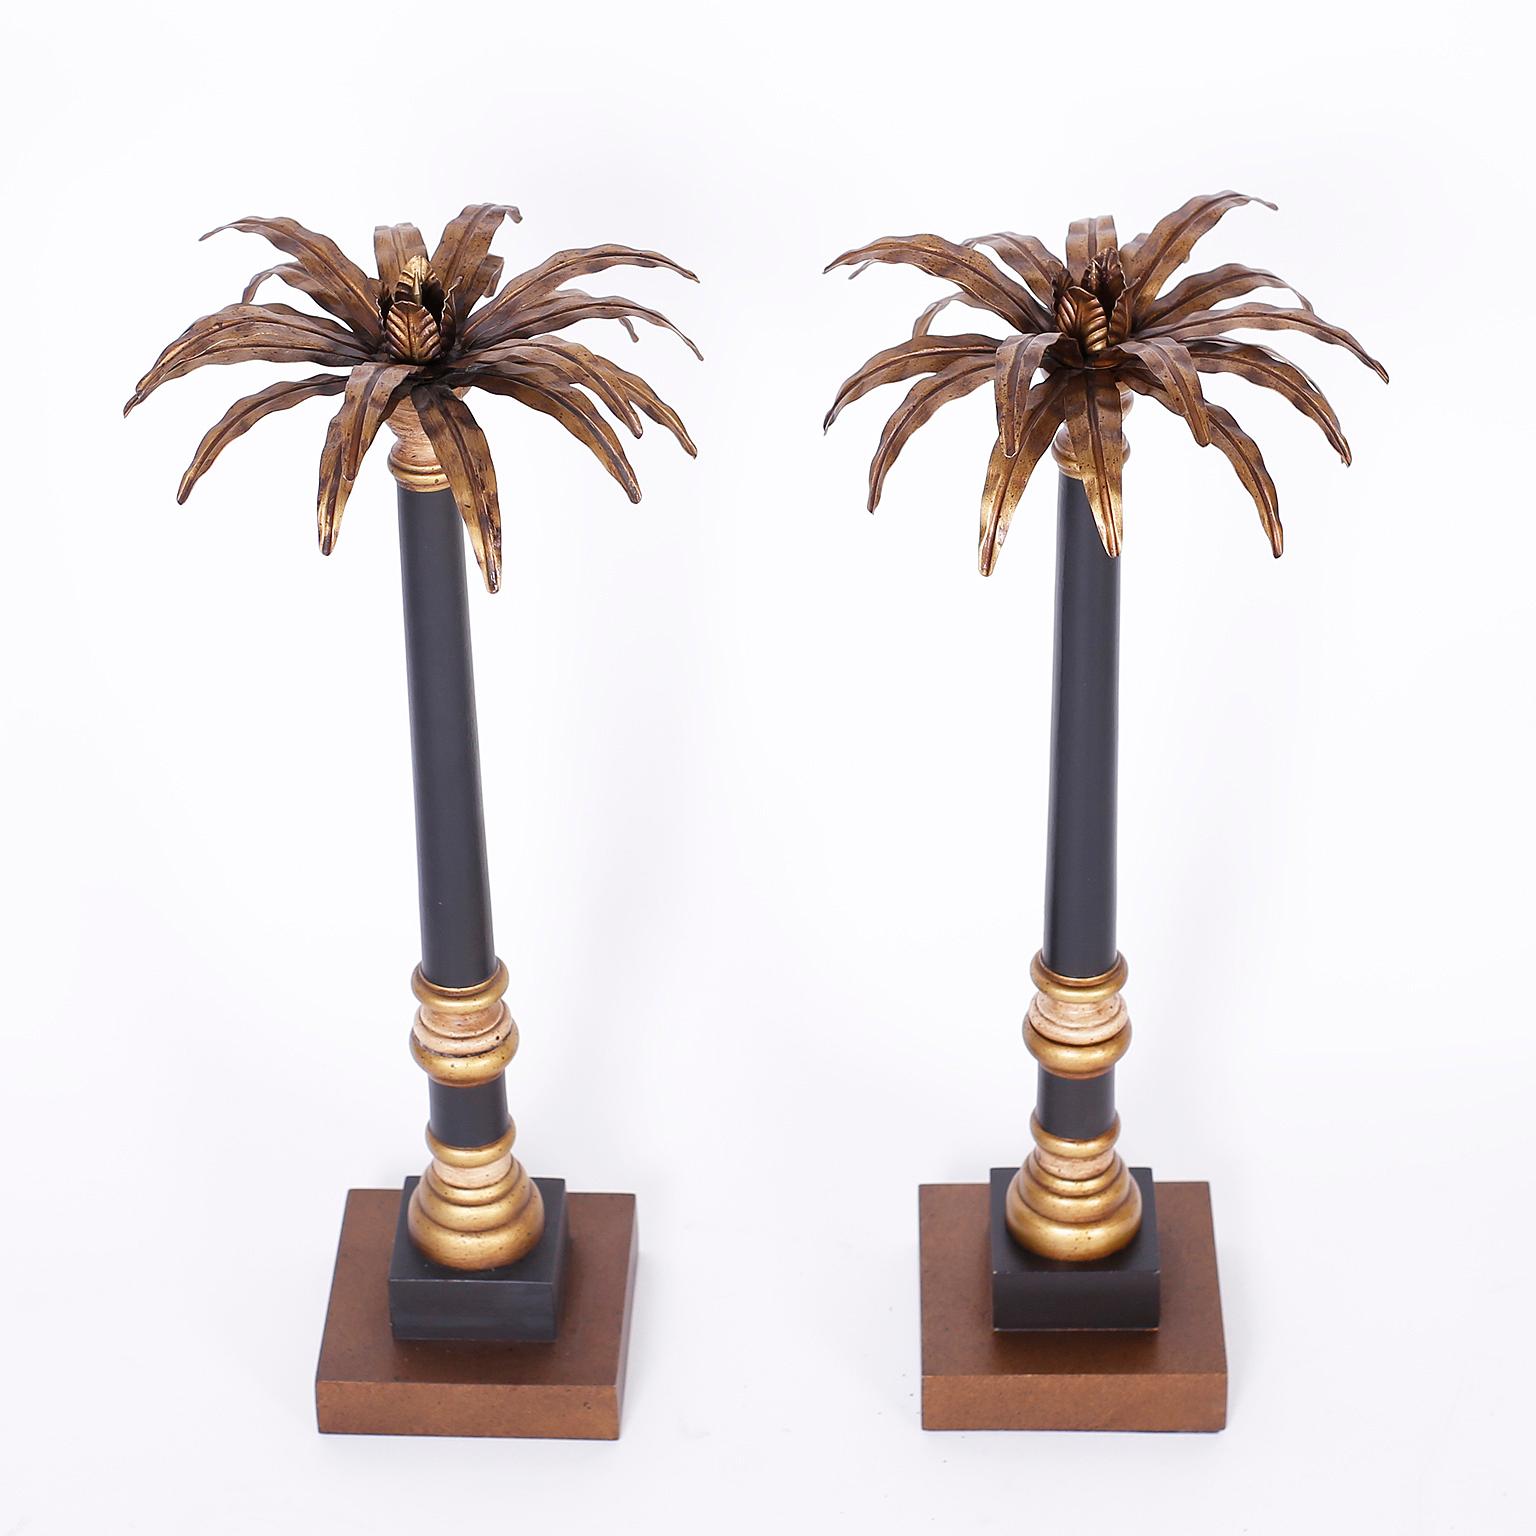 Pair of neoclassic Italian candlesticks with stylized brass palm tree tops having pricket candleholders over black and gold painted turned wood bases with classical form.